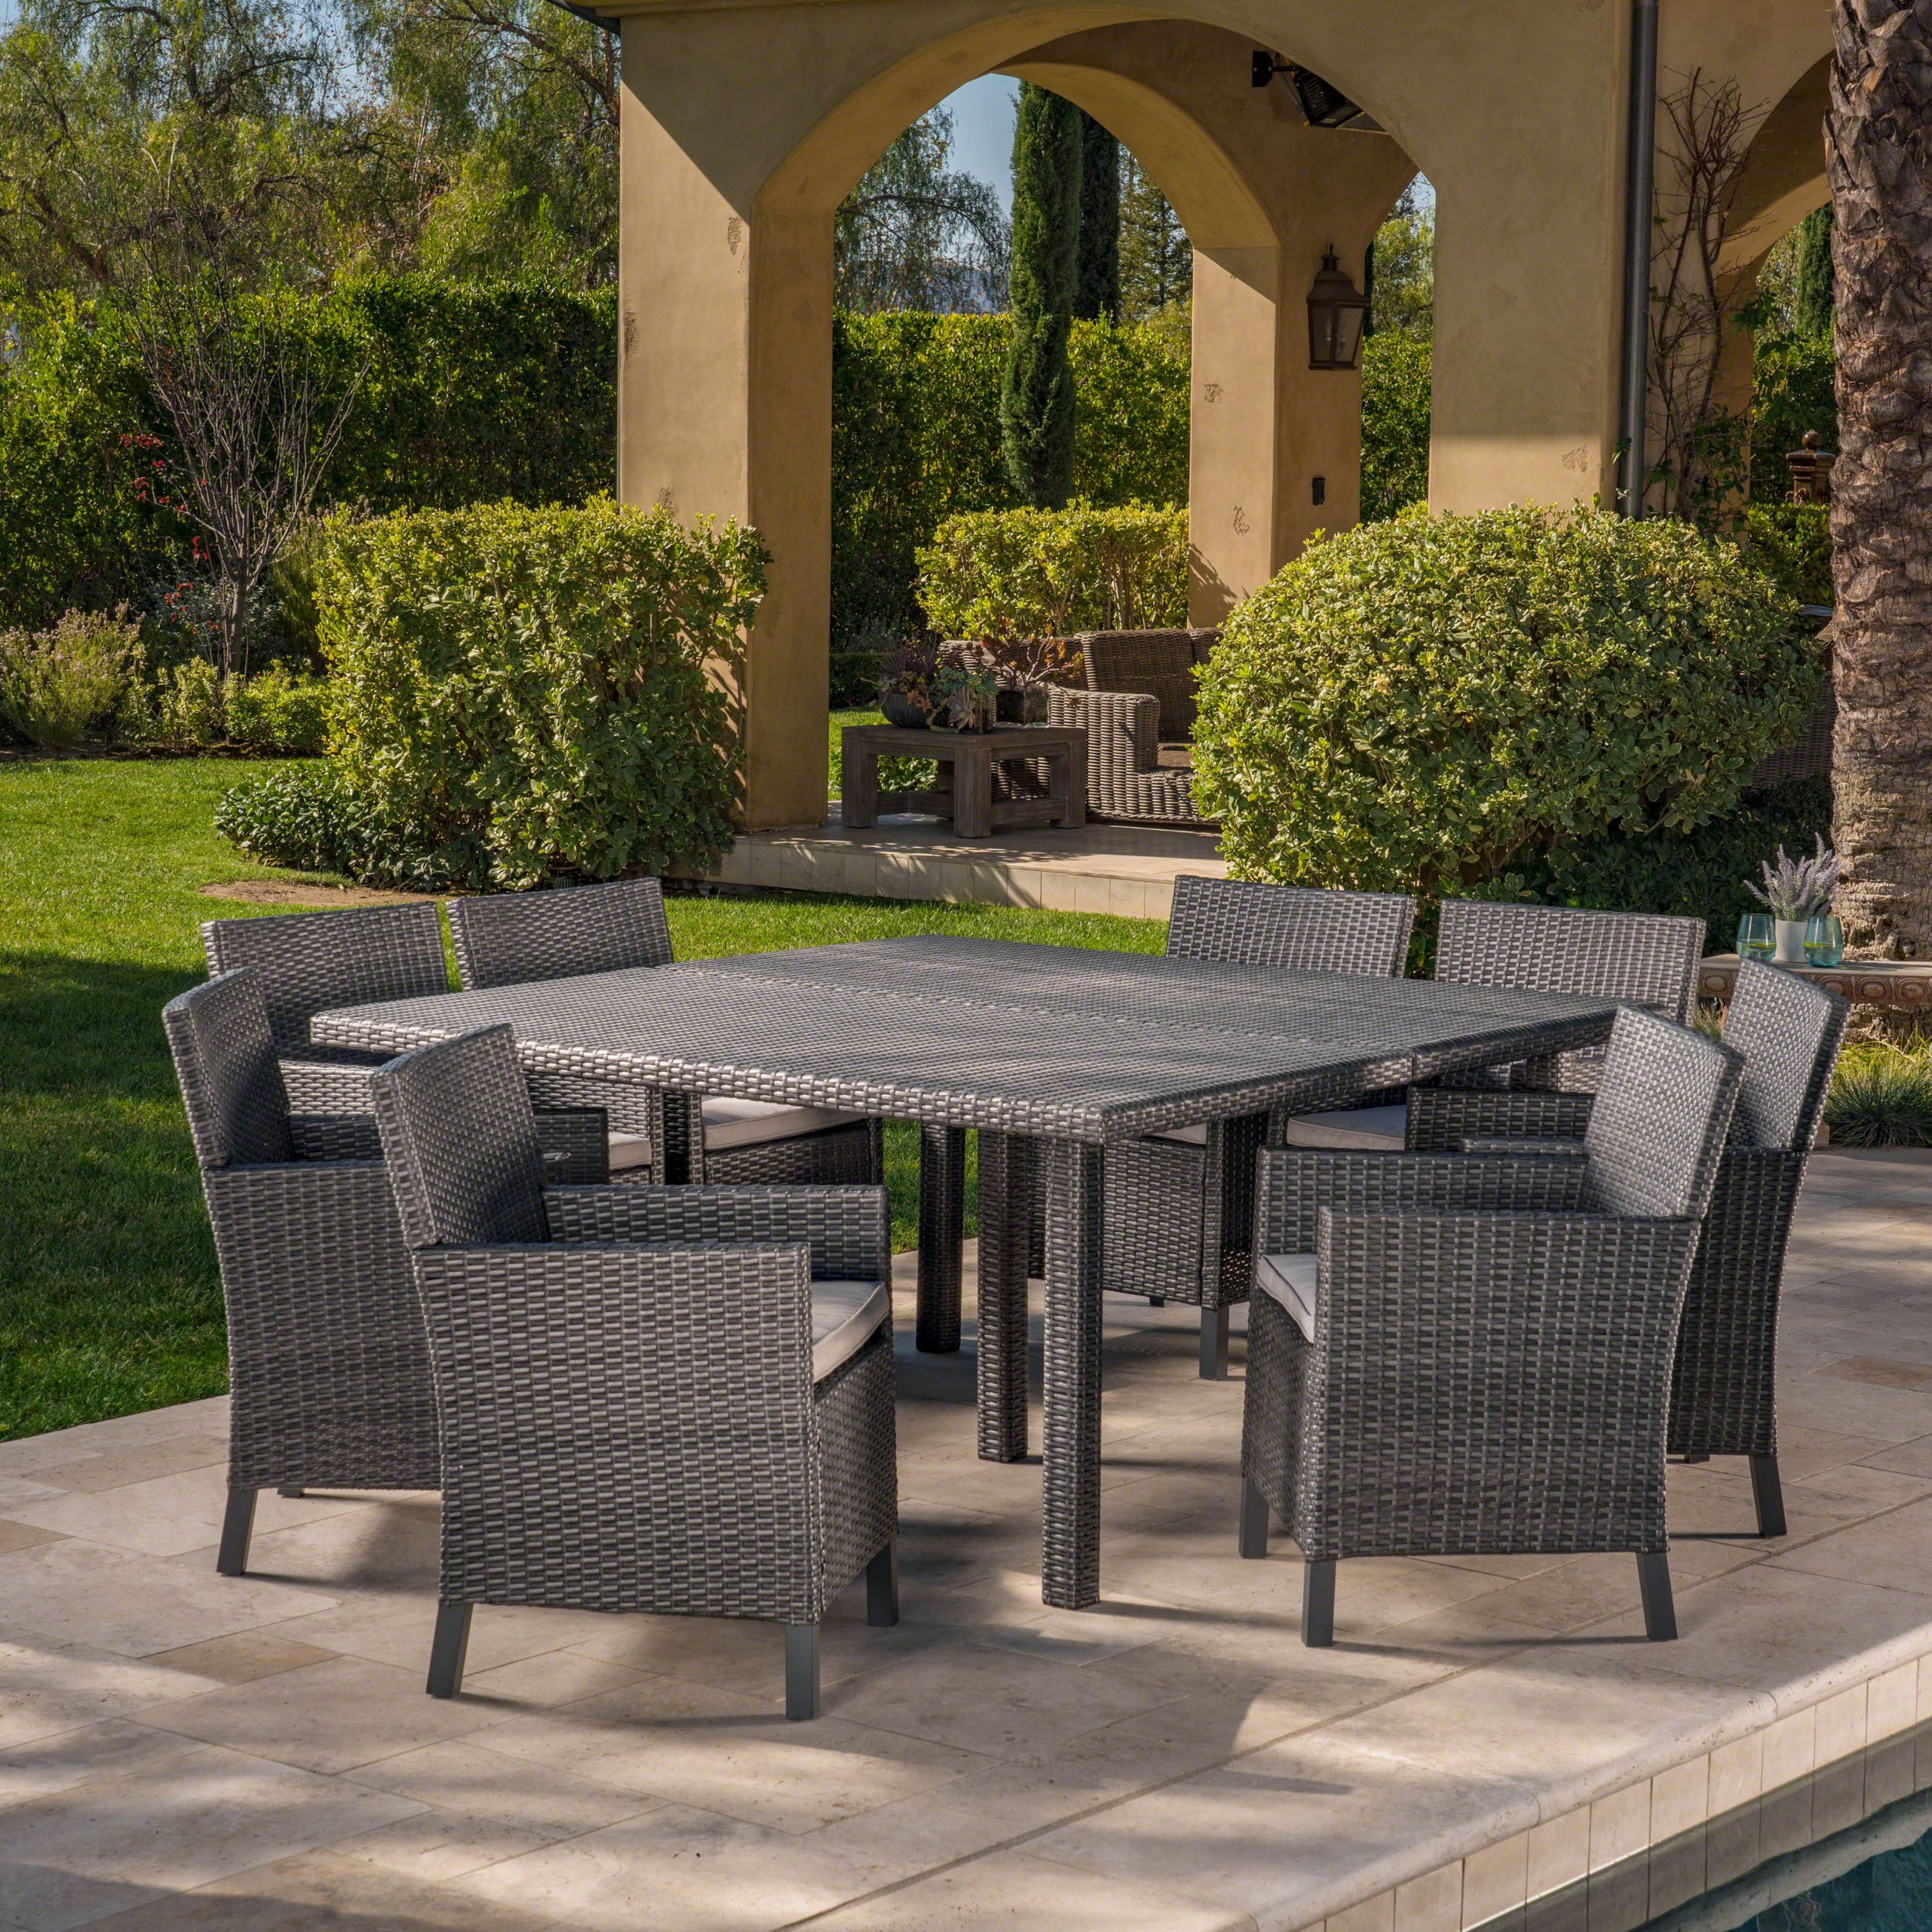 Alice Outdoor 9 Piece Wicker Square Dining Set With Water Resistant Pertaining To Gray Wicker Rectangular Patio Dining Sets (View 6 of 15)